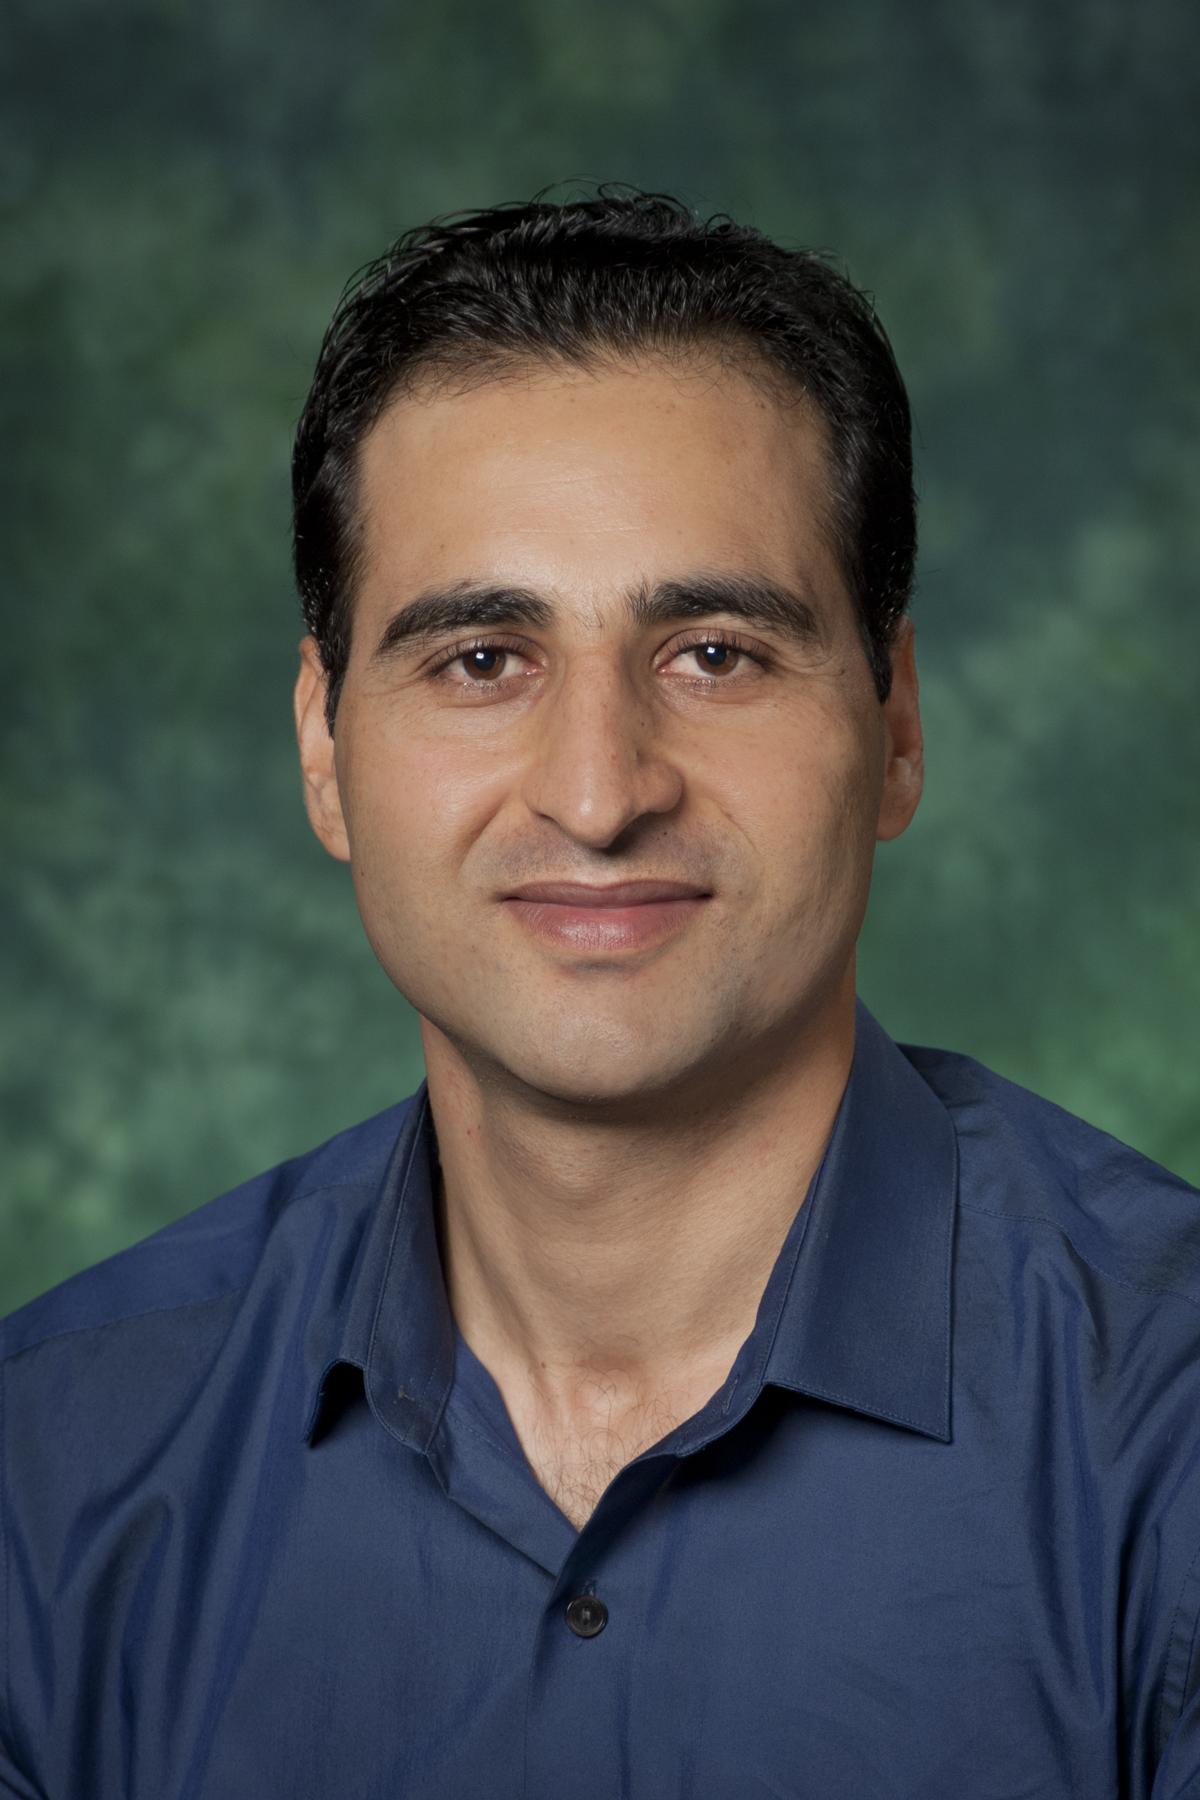 2019 Early Career Award for Research and Creativity, Hassan Takabi